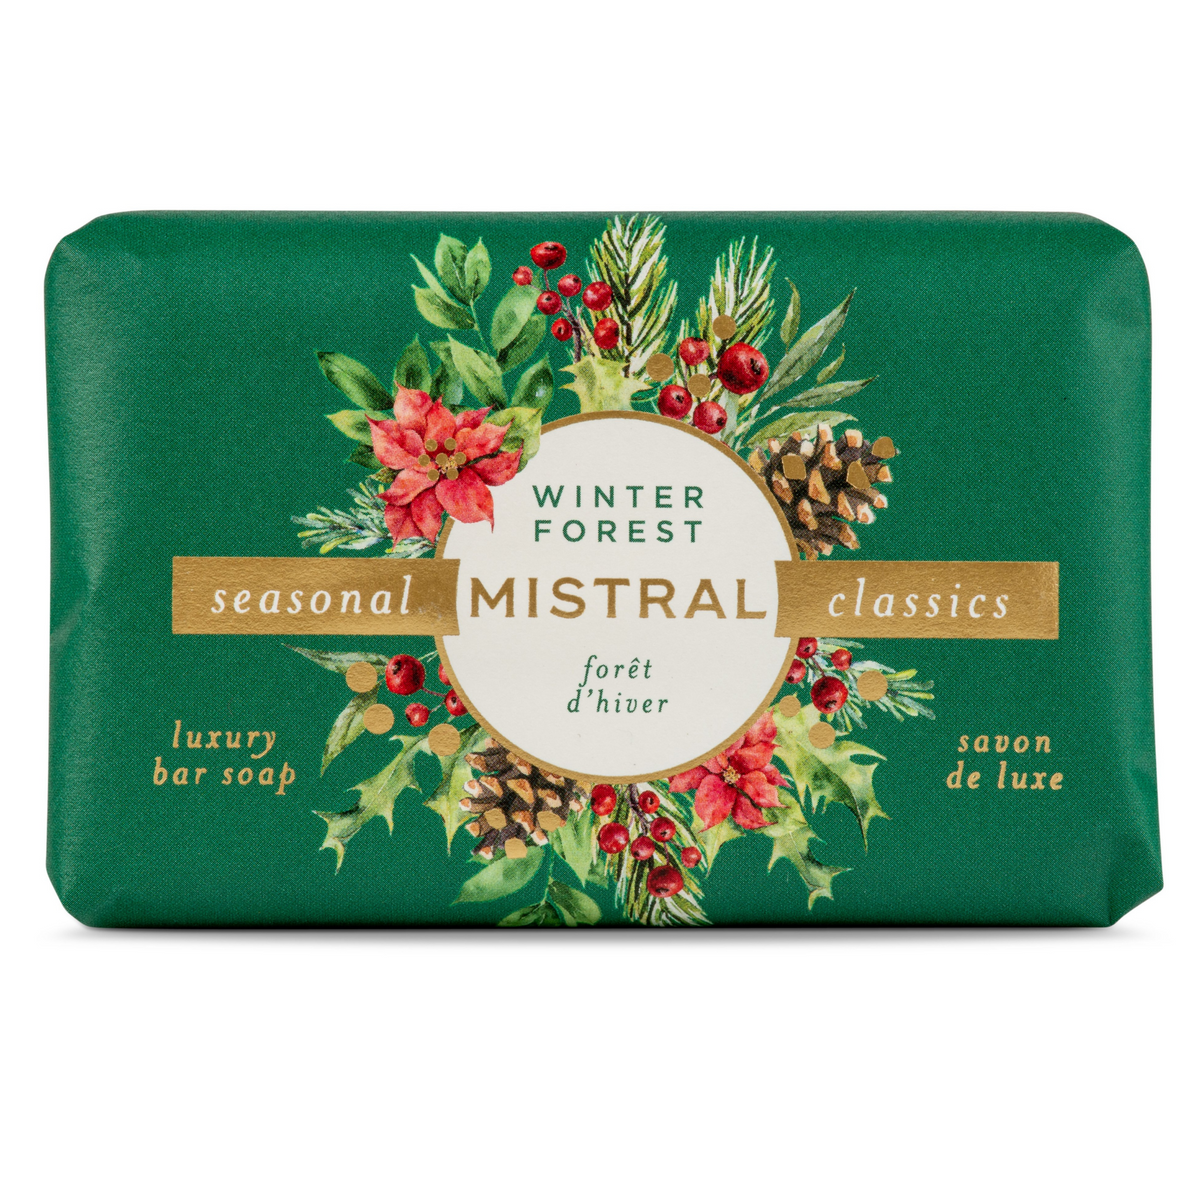 Primary Image of Seasonal Classic Winter Forest Bar Soap